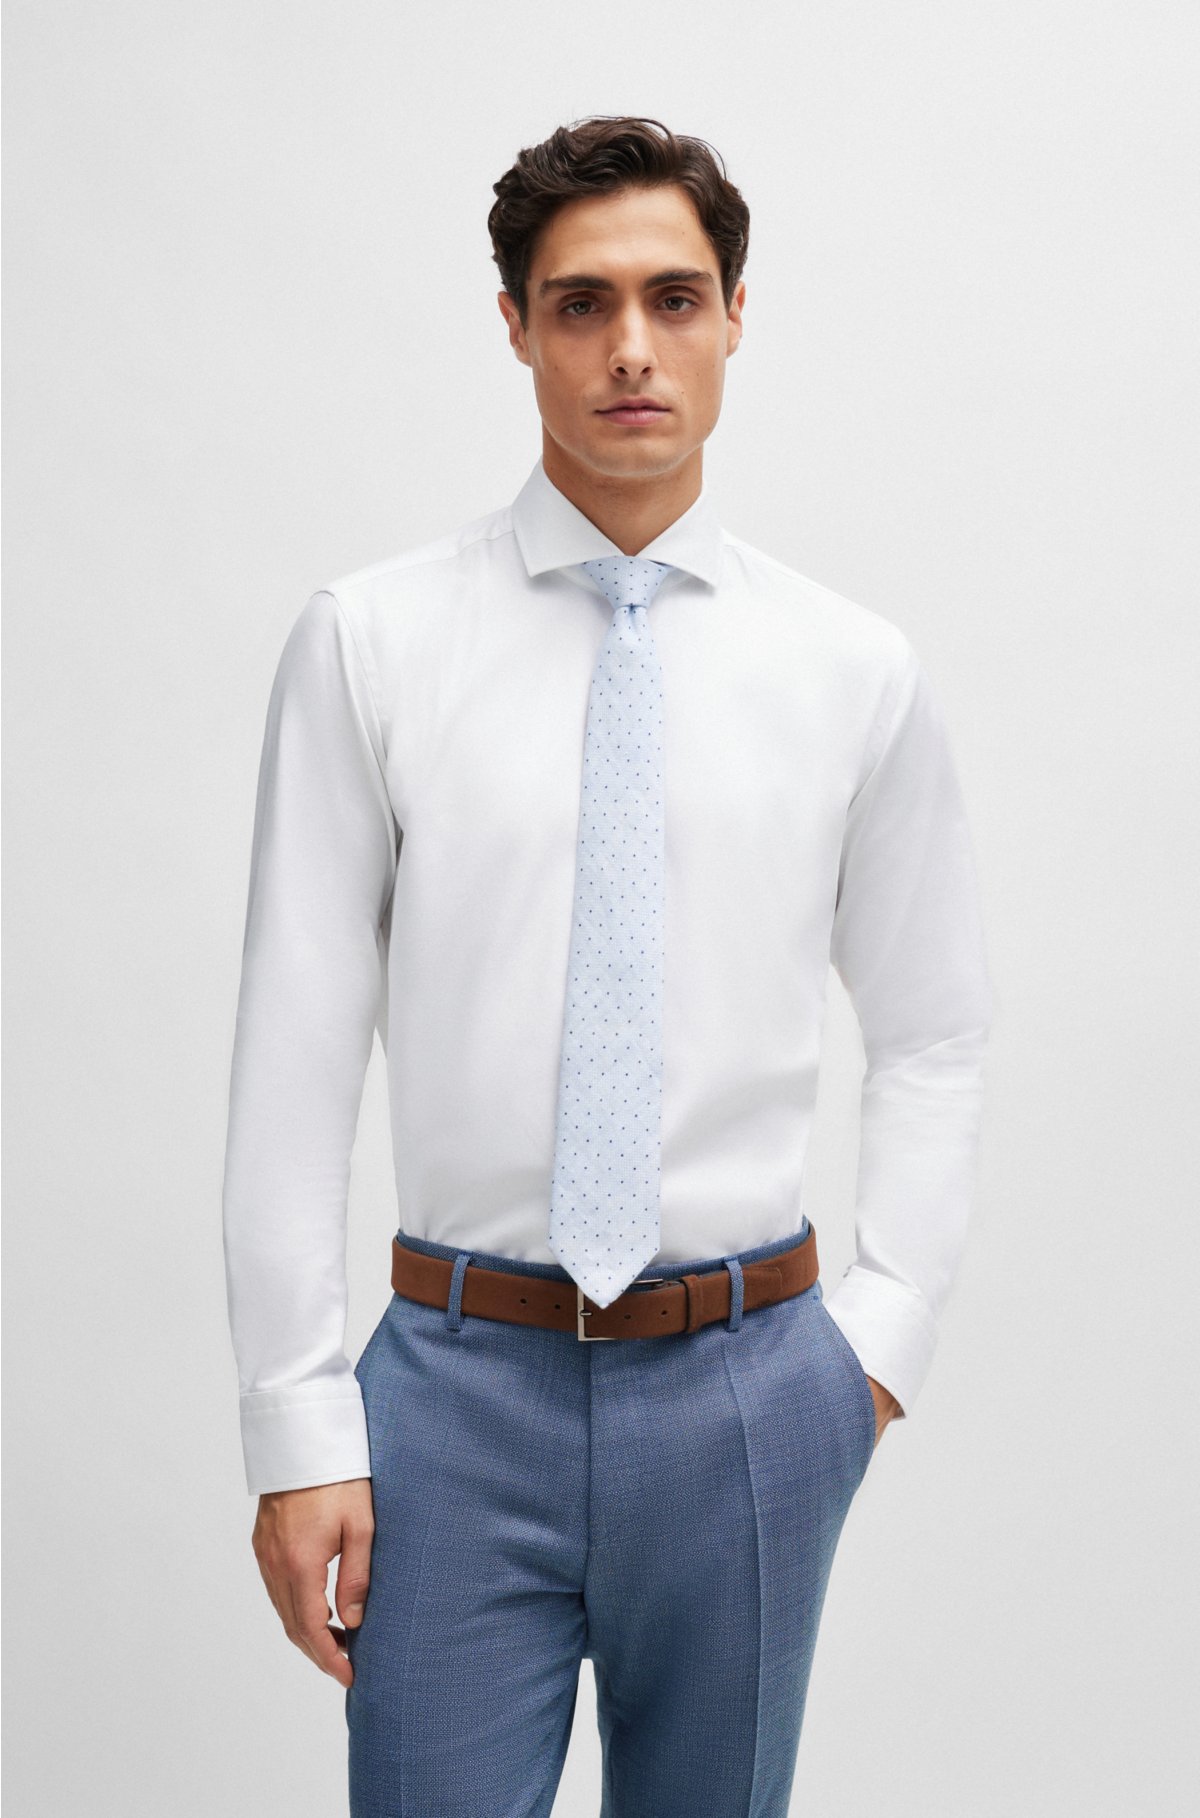 Dot-print tie in linen and cotton, Light Blue